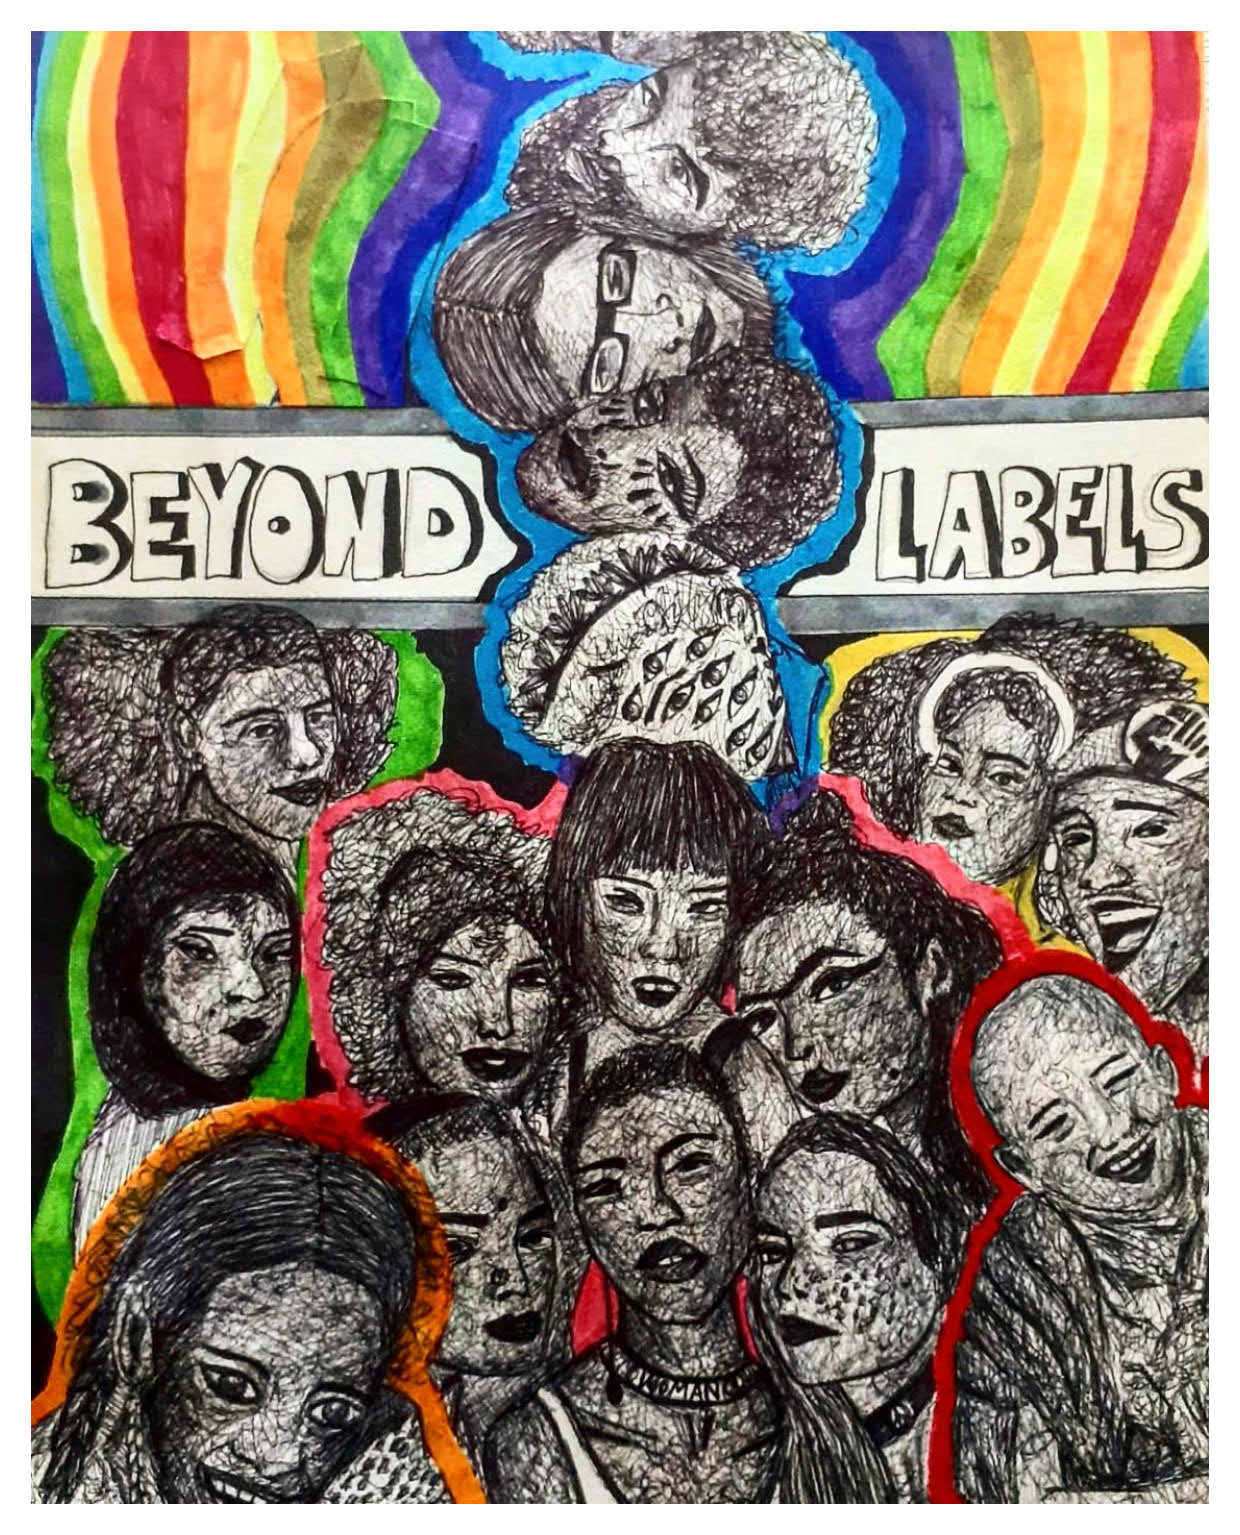 ‘Beyond labels’ is the concept where differences are celebrated. We’re more than just social-labels. We are what we make ourselves to be and that’s what I wanted to bring out in this art piece. To highlight different intersectionality of race, gender, size and religion.   The front has a group of women who represent diversity & inclusion amongst women. A patriarchal expectation of women is fighting to see who’s the most beautiful one. I wanted to break that stereotype by showing women of different races (African, Indian, Caucasian, Mexican, Asian & Middle-eastern) with different appearances (Bindi, nose ring, unibrow, long winged liner, short hair) to show beauty comes in all colors, shapes & sizes. There’s no ‘one definition’ of beauty. They’re outlined in pink, a symbolic representation of using a stereotypic feminine color to debunk stereotypes of how they should look like.  Yellow borderline represents the black lives movement and the oppressive attacks that black people had to encounter. The green highlight represents religious rights, thus showing a Muslim woman and a person of Bahai faith. Yellow and red show the children representing their nations in both their cultural and racial conflicts such as the Rohingya incident. The blue highlight shows all men laying cheek to cheek, to break the stereotype that men can’t be intimate with other men. There’s also men that show their gender expression and femineity through the artwork on their face such as the multi-eyed man and man with makeup.  All these color boundaries intersect, to show that we are more connected than we think we are and they all form a rainbow that cascades to the top which insinuates LGBT rights as well as harmony within diversity beyond societal labels.